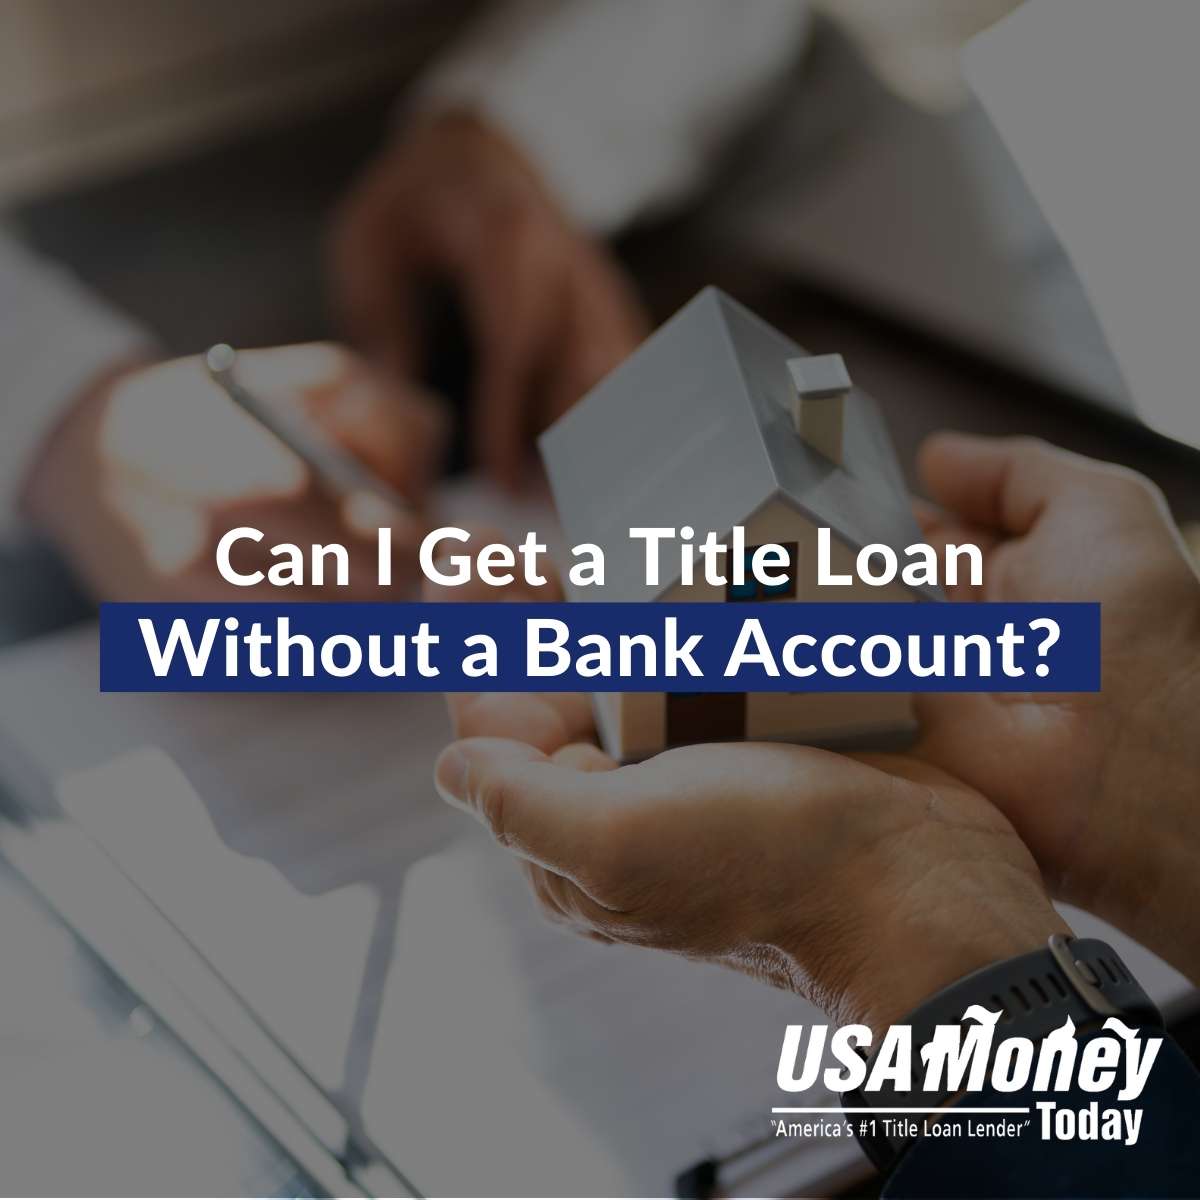 Getting a title loan without a bank account in Nevada